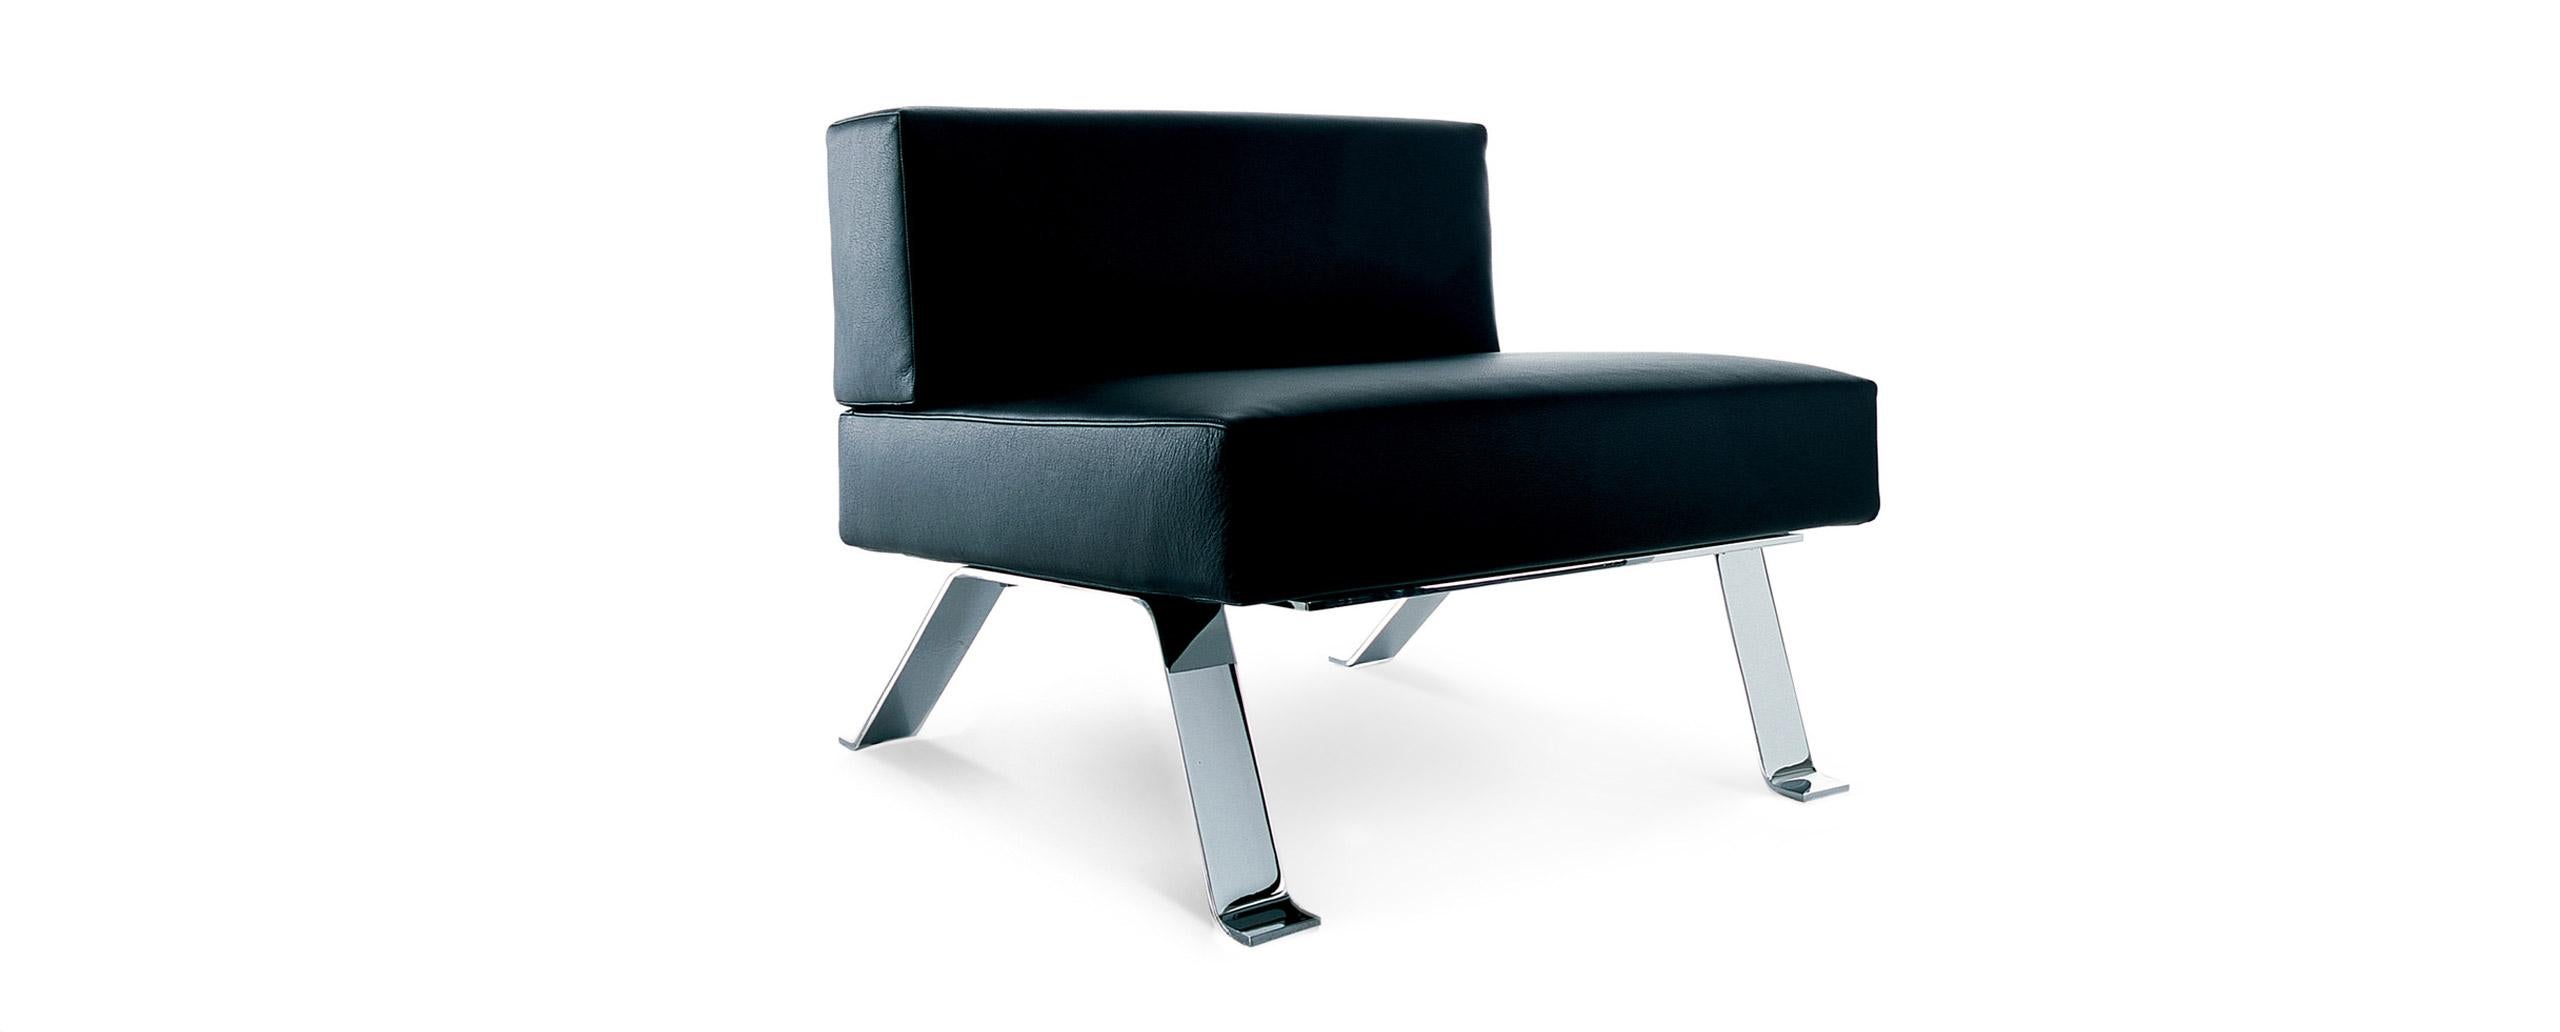 Contemporary Charlotte Perriand Ombra Easychair